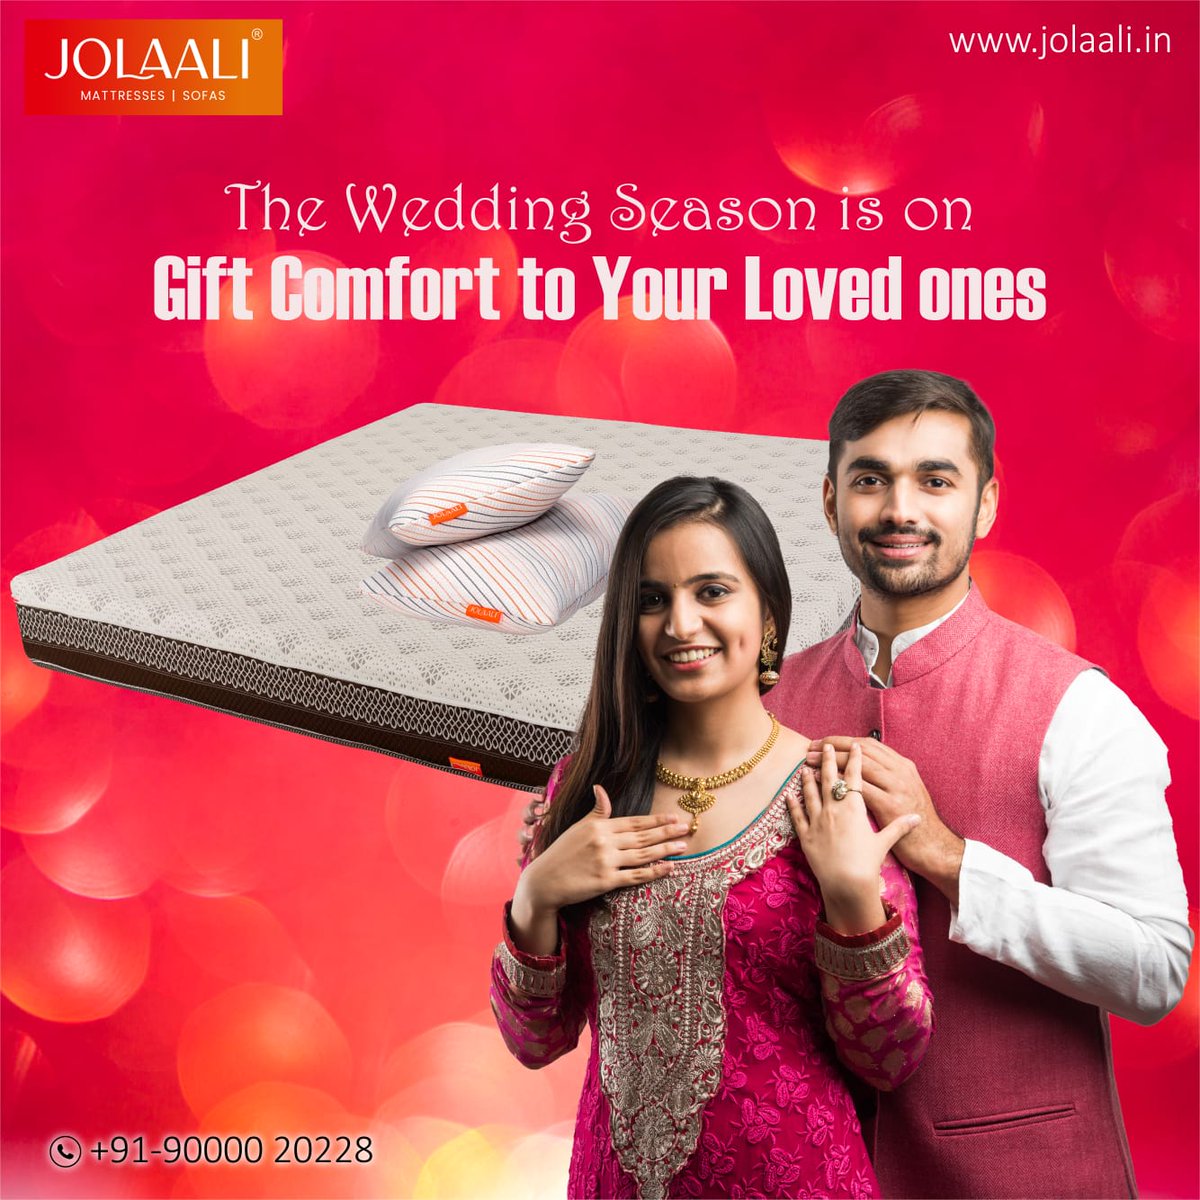 On this wedding season gift your loved ones and family members comfortable Jolaali mattresses which comes in a wide range of collection
#mattresses #sleep #comfort #bedmattress #bedroomfurniture #bettersleep #bestmattress #Jolaalimattresses #Jolaali #weddings #weddinggifts #gifts